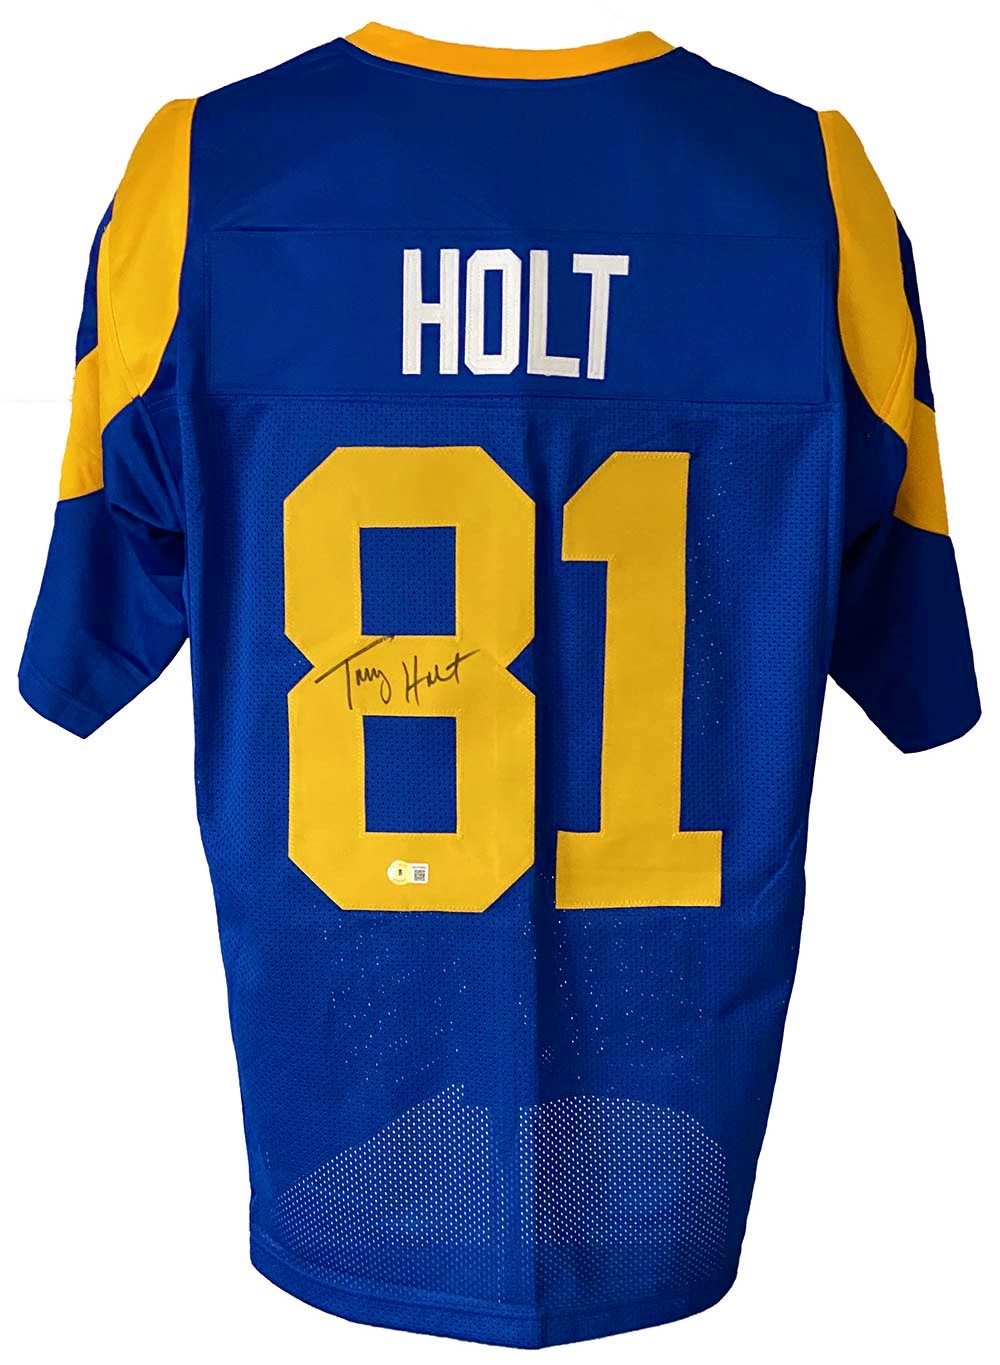 St. Louis Rams Torry Holt Signed Pro Style Throwback Blue Jersey ...